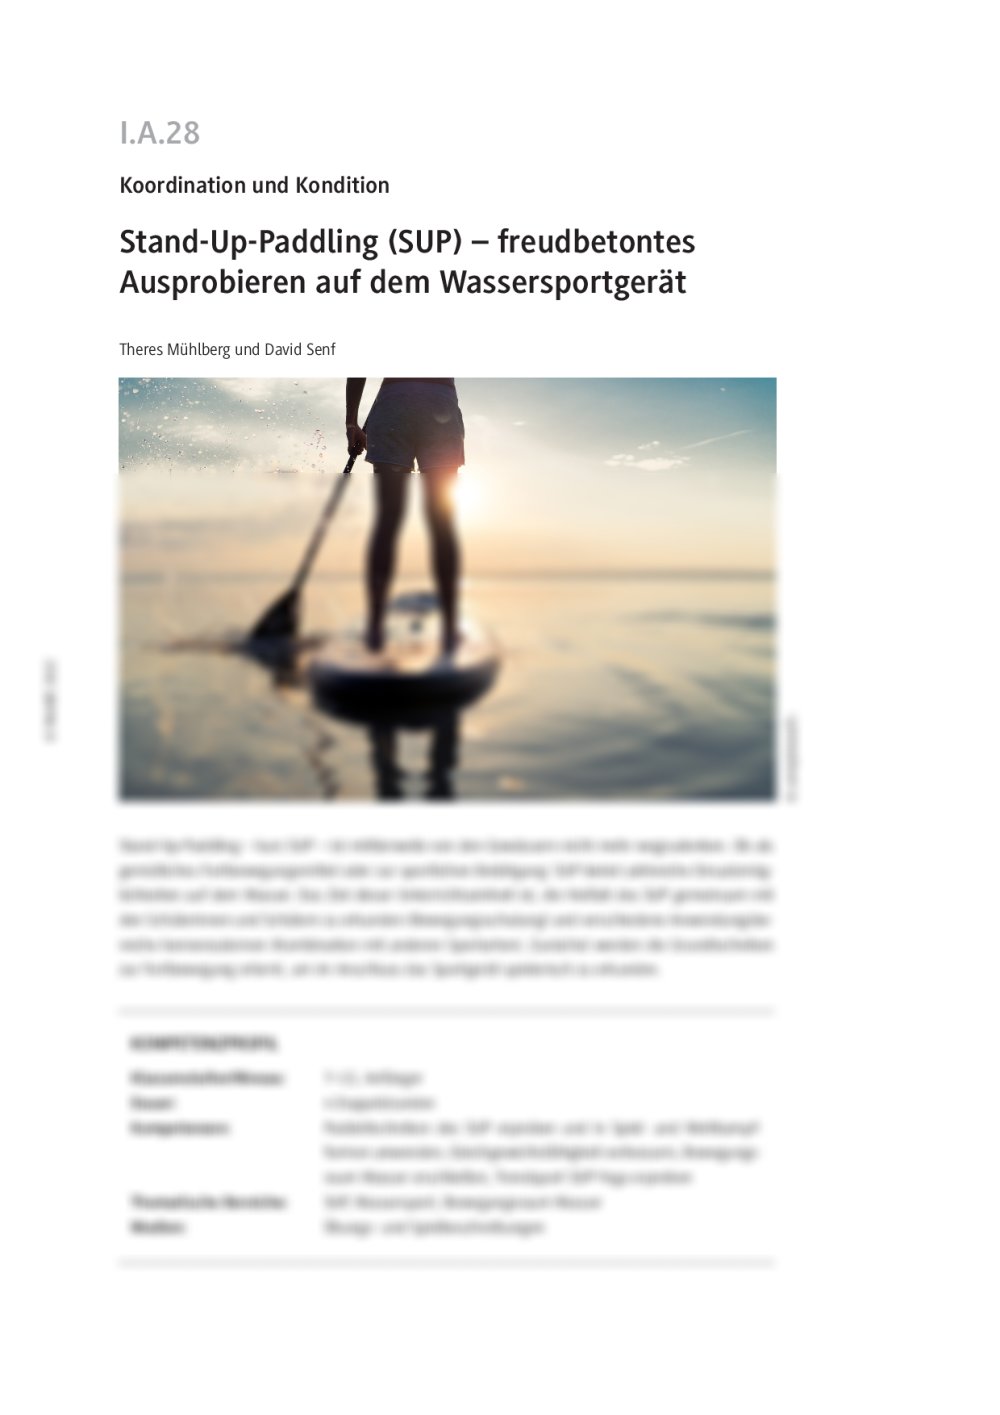 Stand-UP-Paddling (SUP) - Seite 1